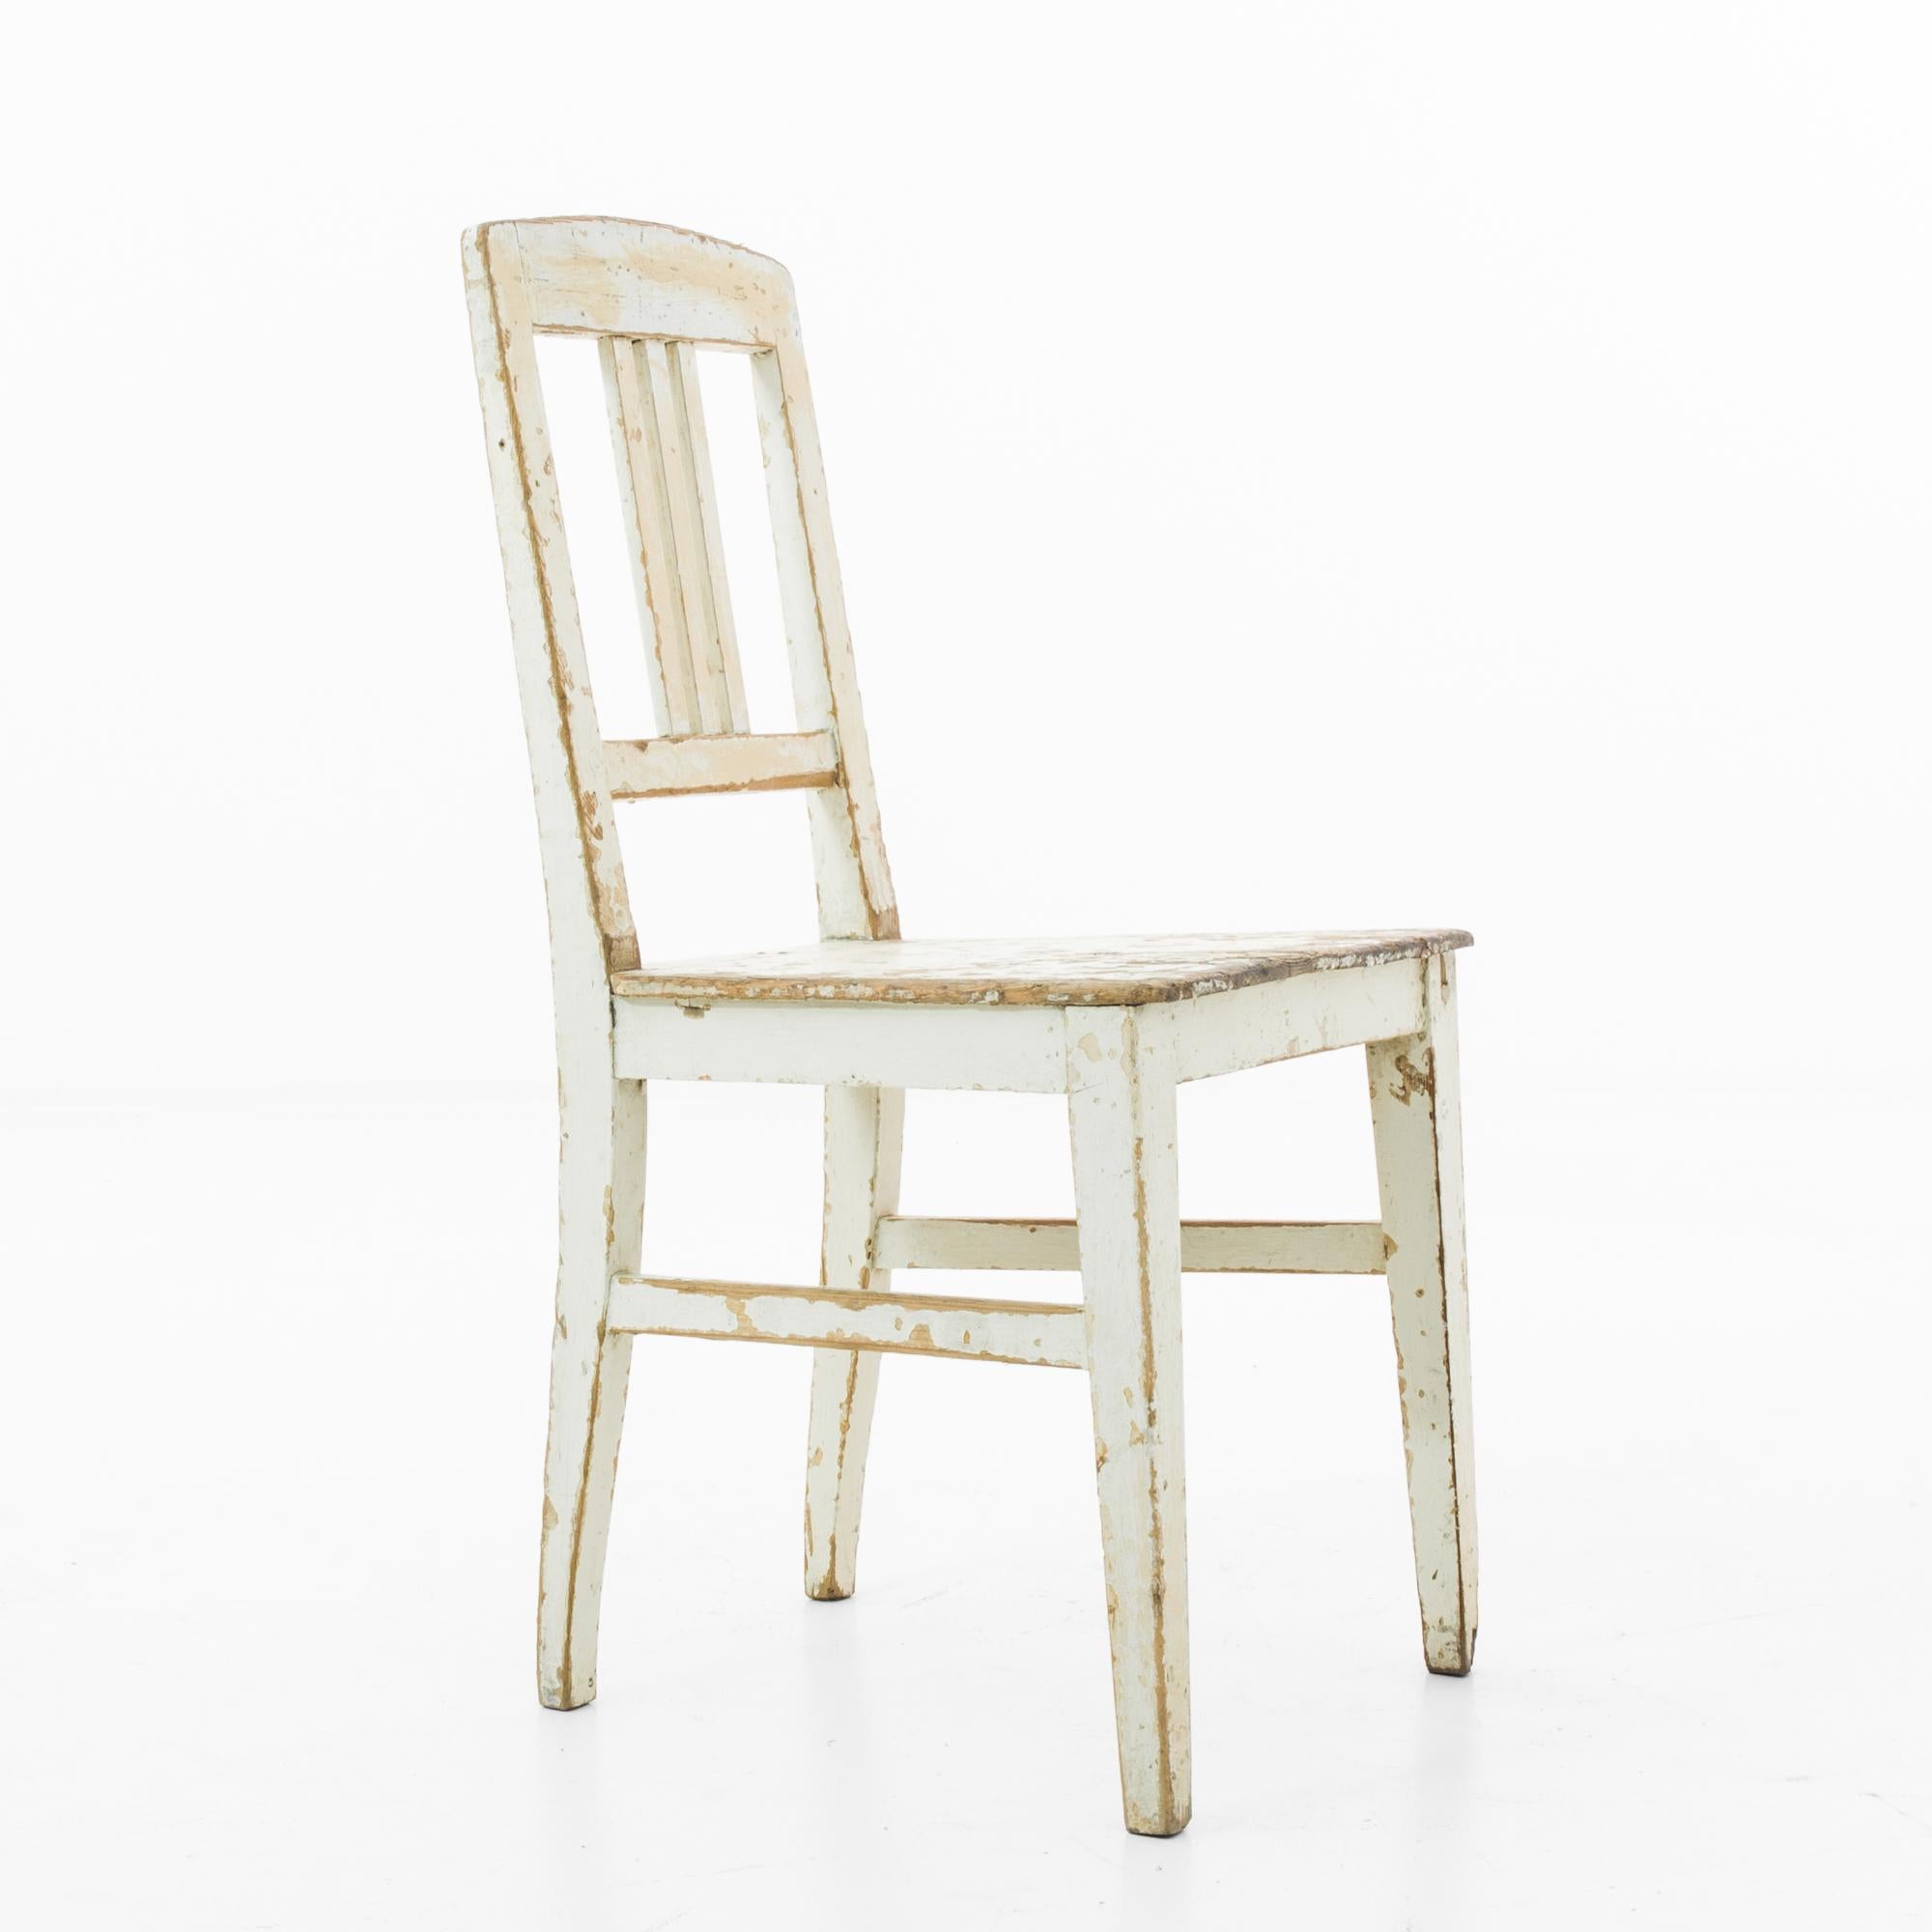 Embrace the authentic vintage charm with this 1910s Czech Wood Patinated Chair. Bearing the beautiful marks of time, its weathered white patina tells a story of a century. Simple yet sturdy, this chair brings a touch of rustic elegance to any space.